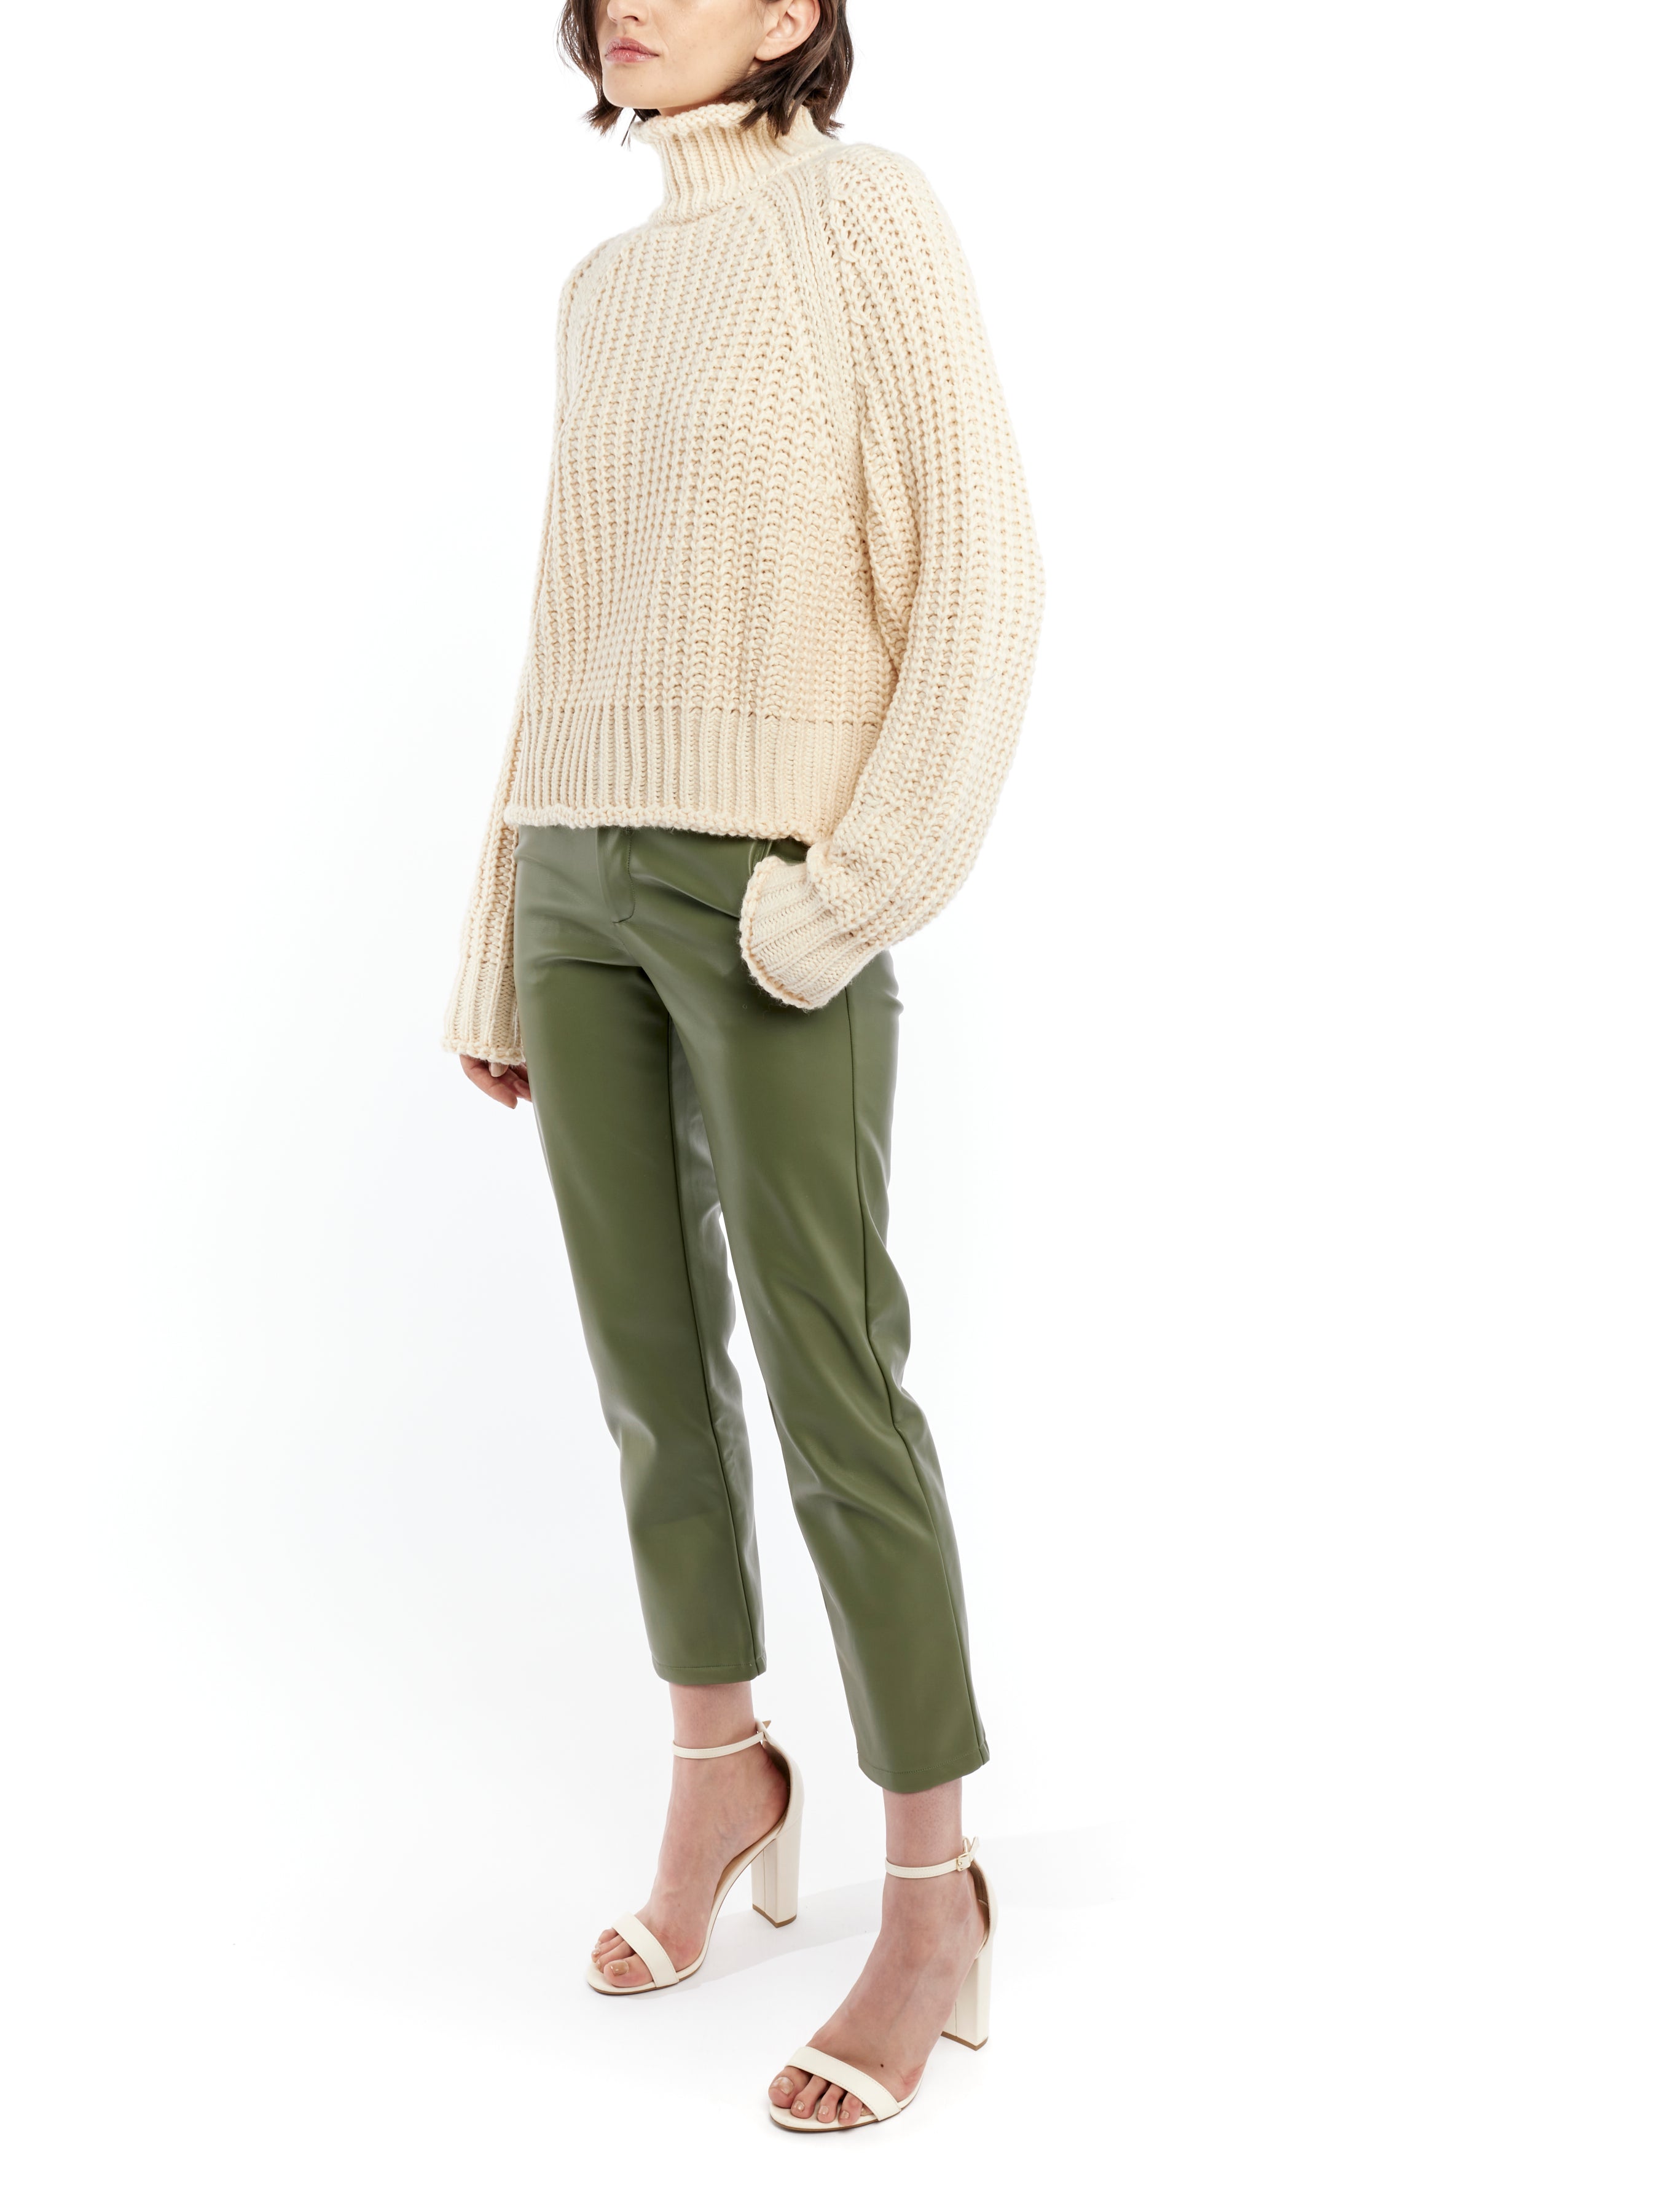 ribbed, chunky knit turtleneck sweater featuring slight balloon sleeves and a funnel neck in creme